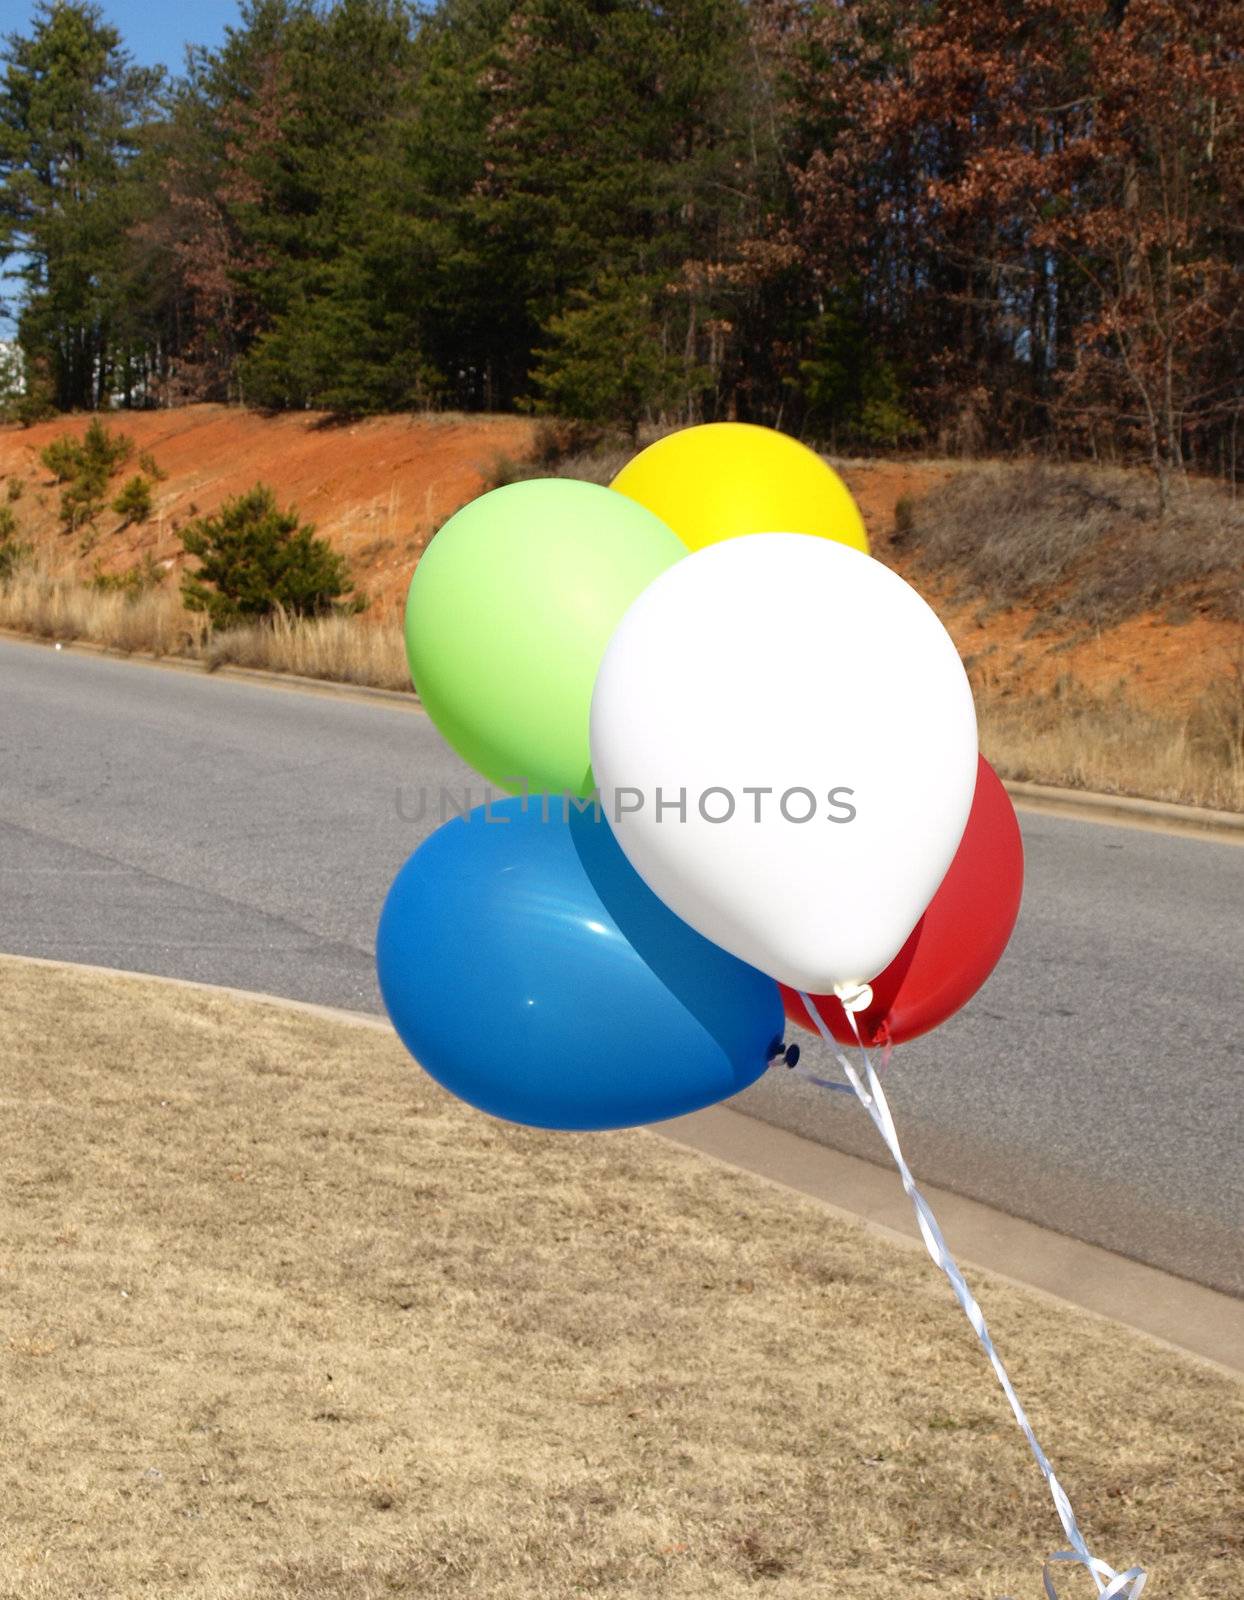 Balloons to nowhere by northwoodsphoto